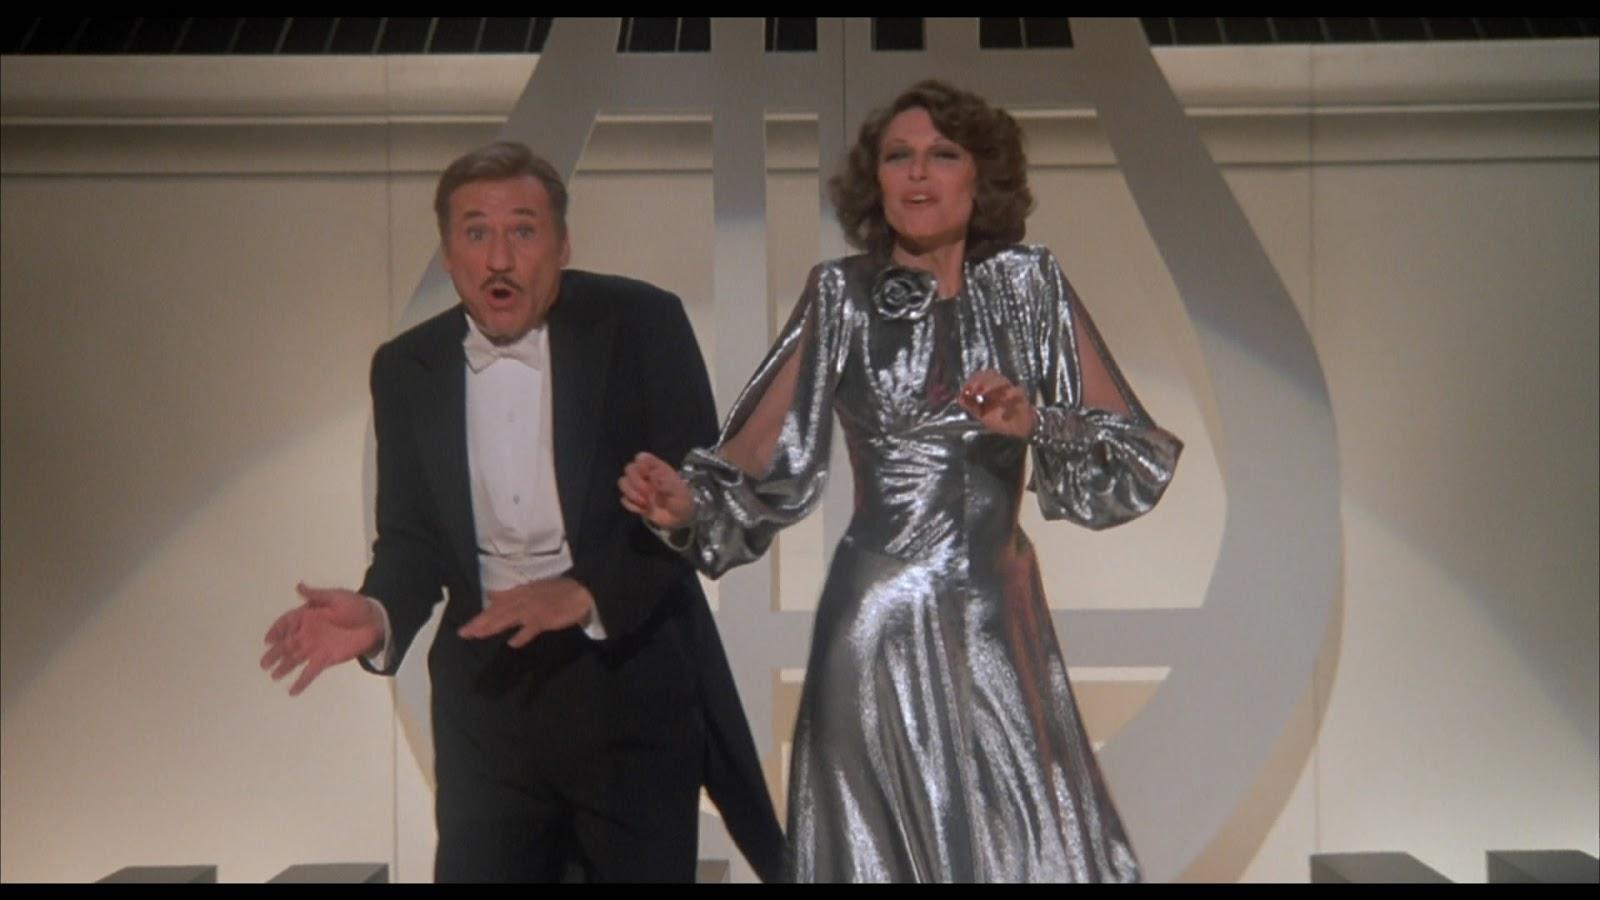 Mel Brooks and Anne Bancroft in 'To Be or Not to Be'